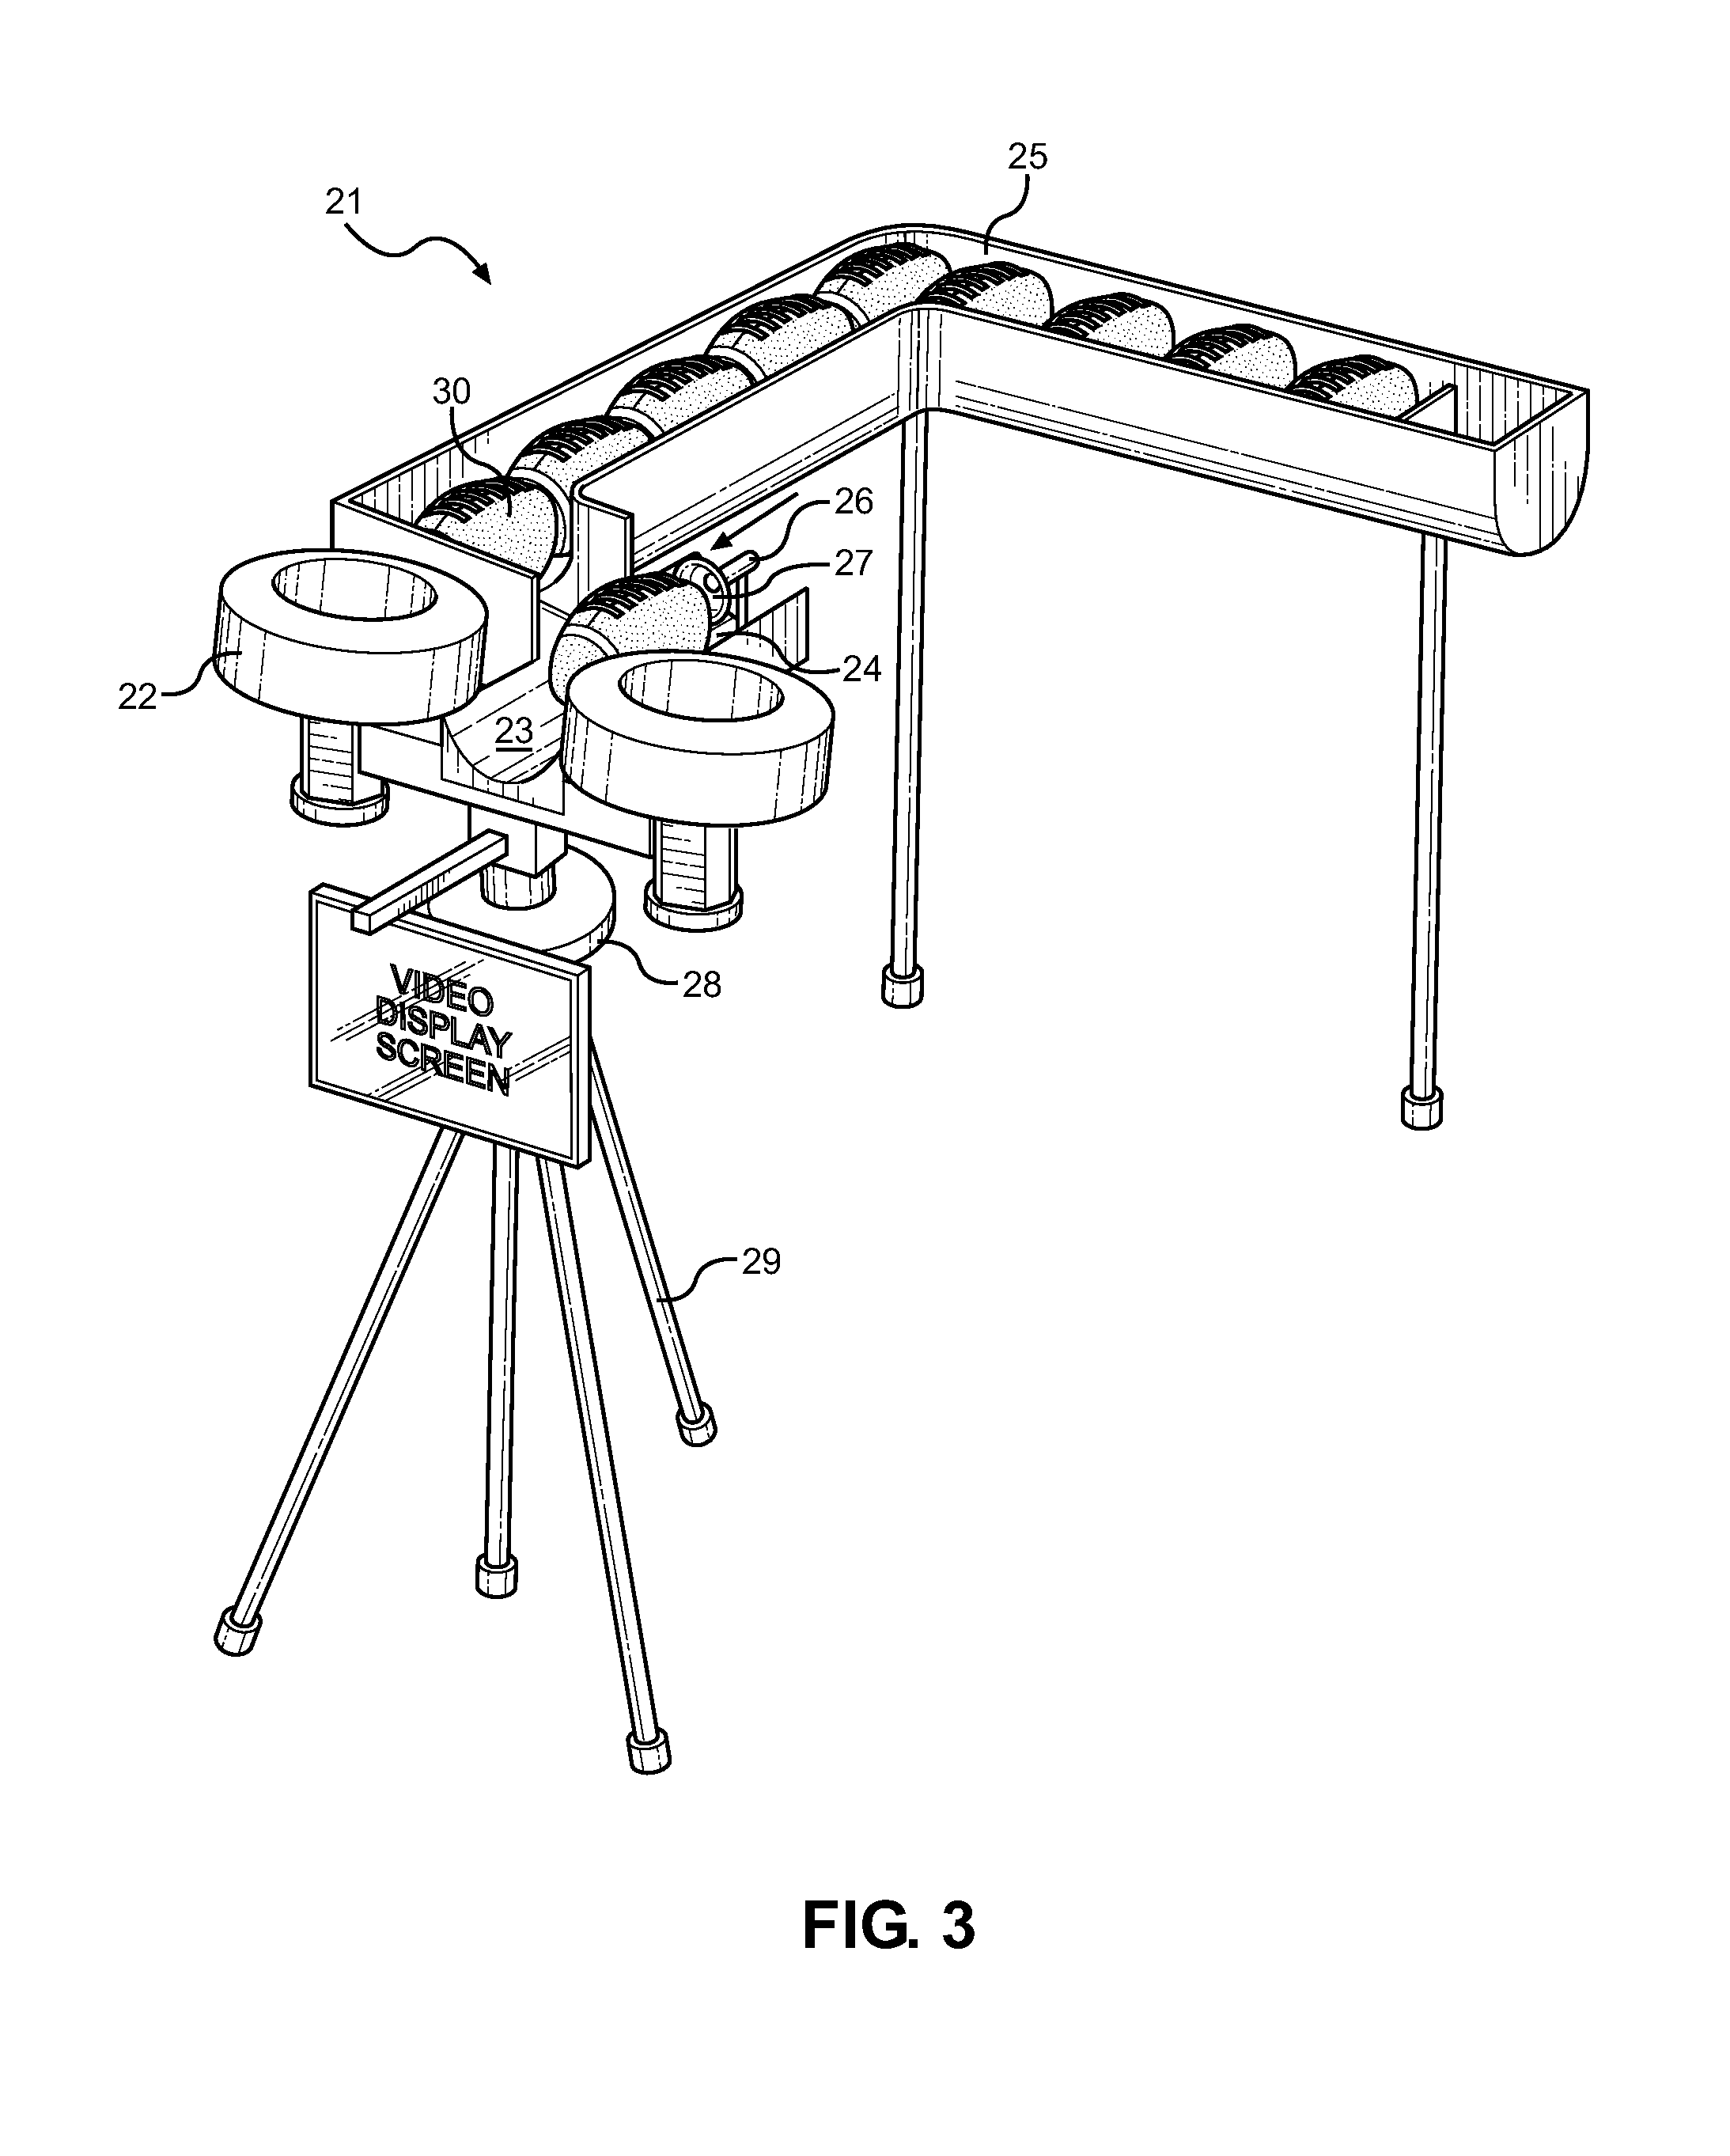 Football Throwing System and Method of Operation